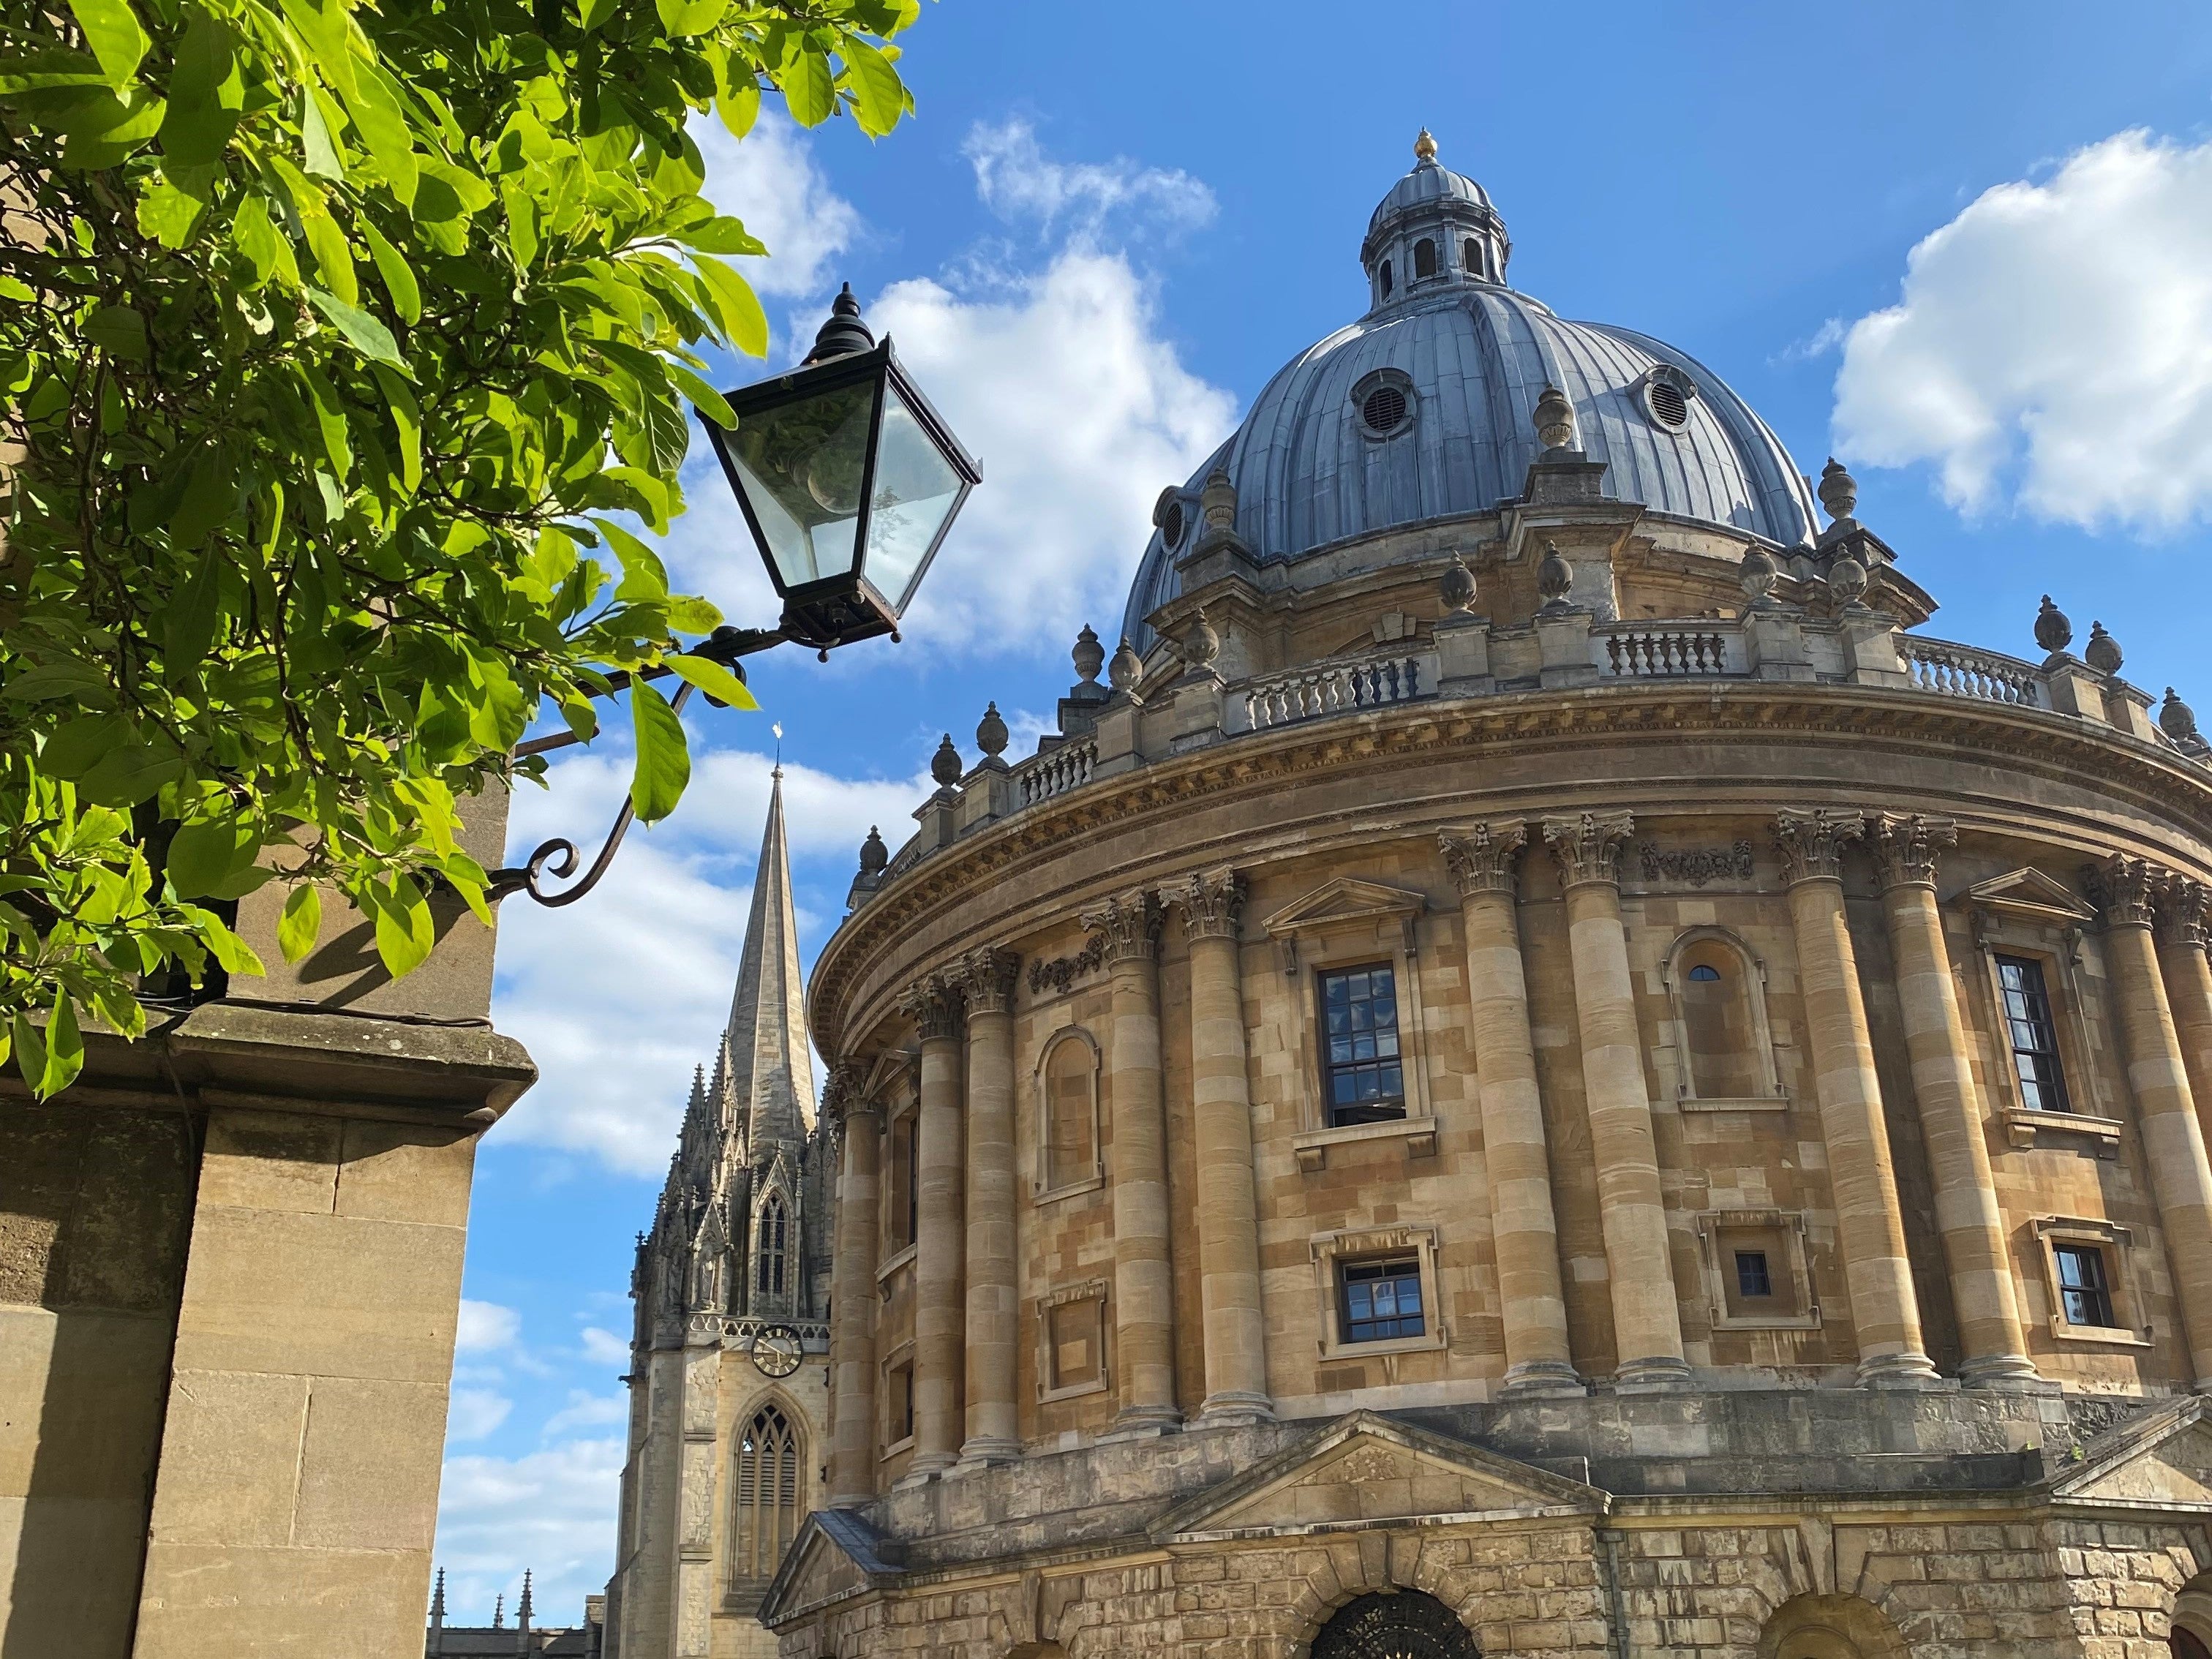 Radcliffe camera in Oxford